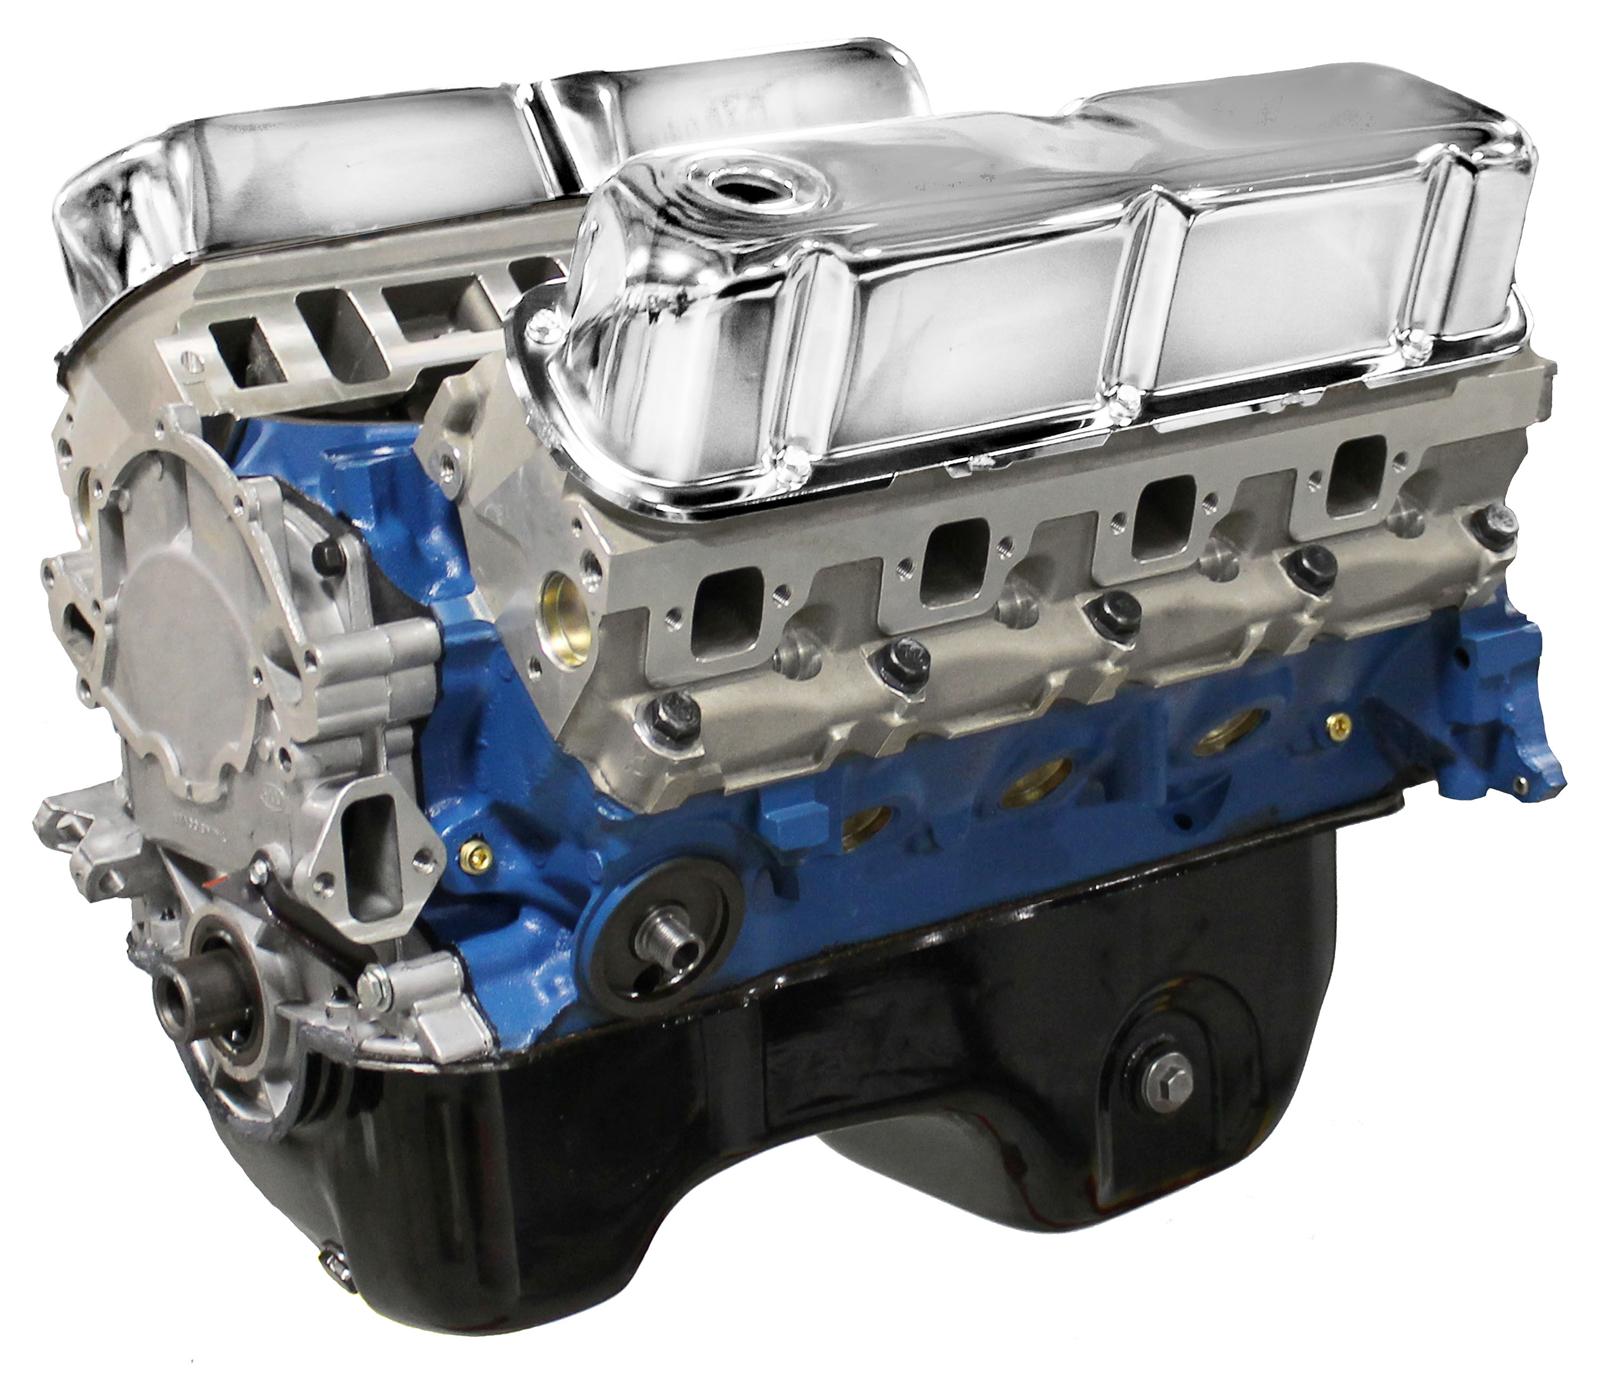 Shop Crate Engines at Summit Racing. 